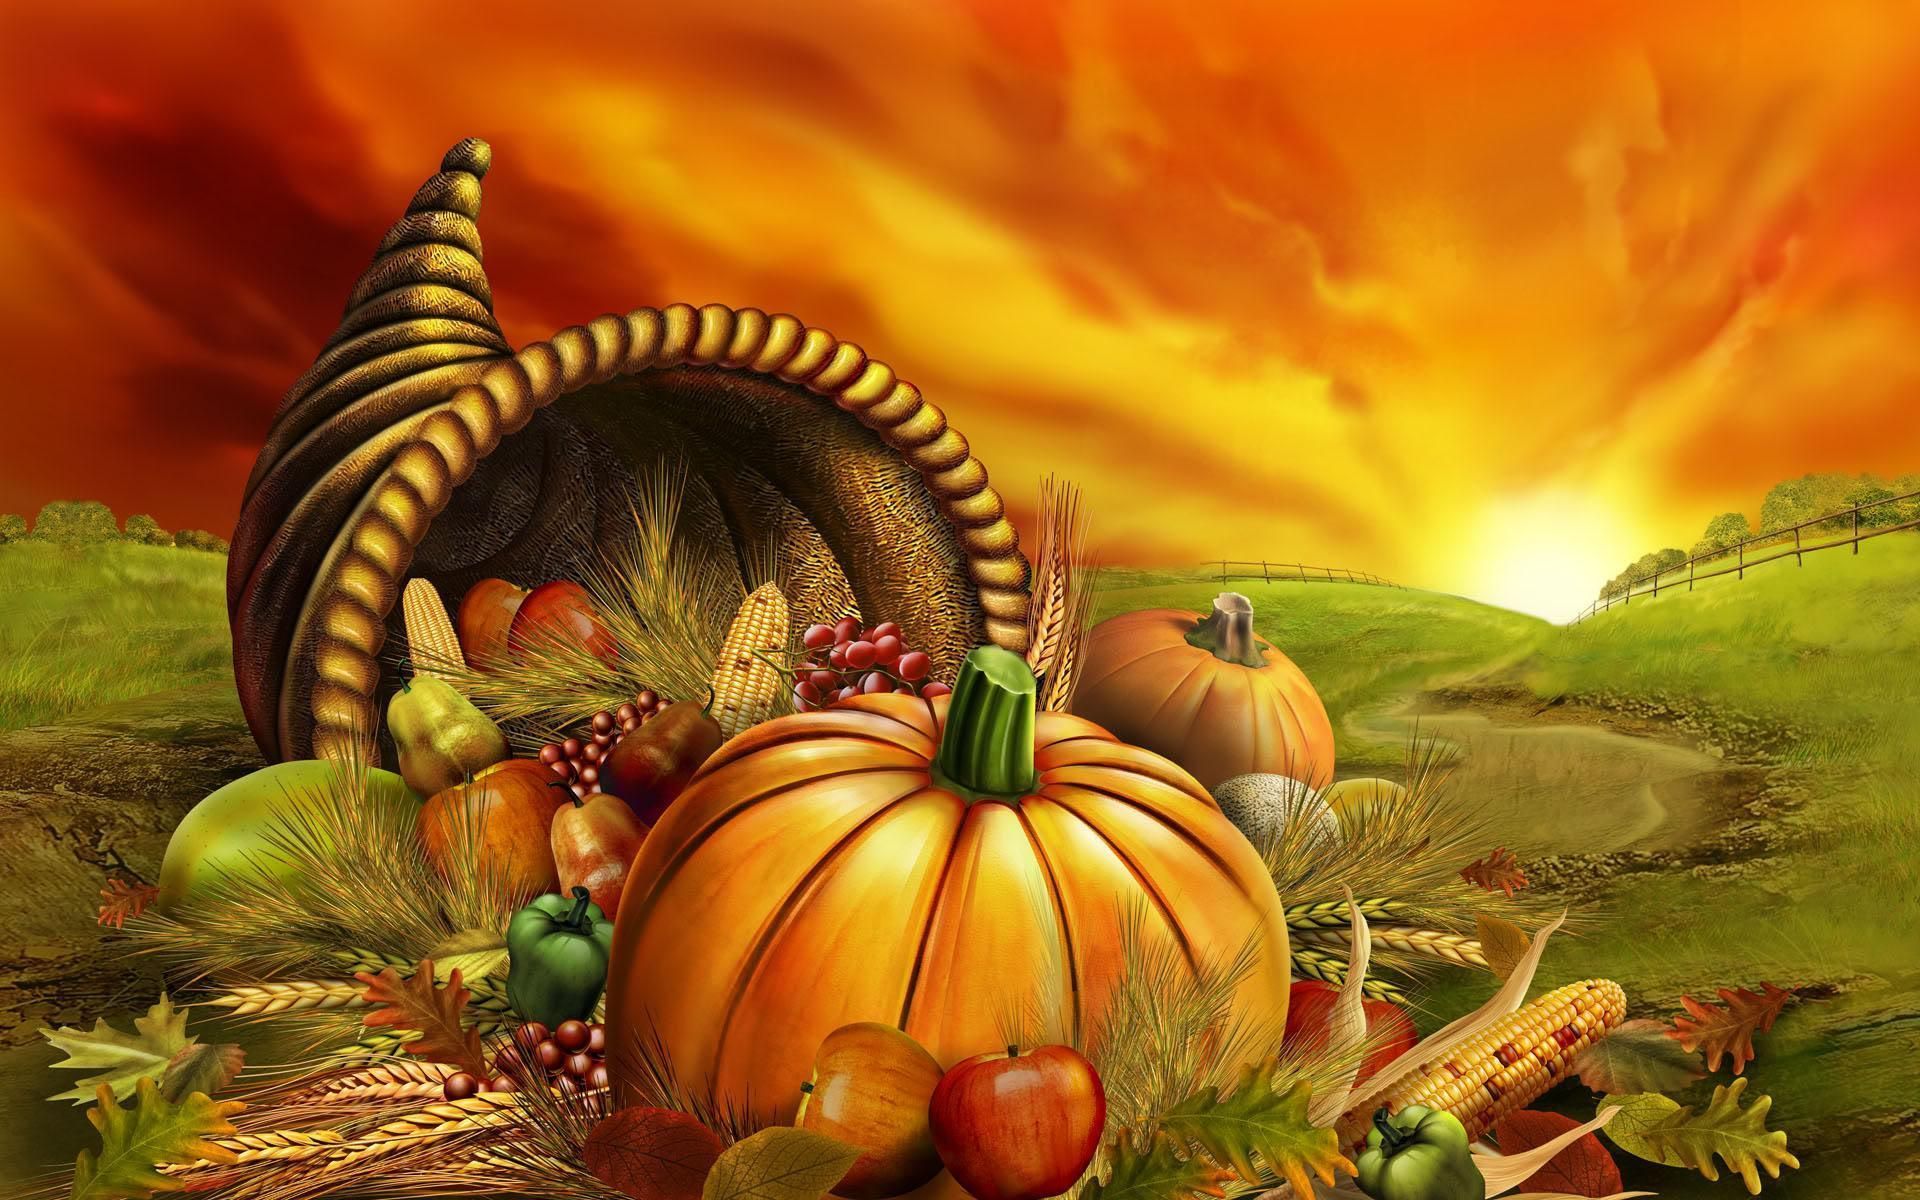 Free Thanksgiving Background Wallpaper For Desktop. Thanksgiving picture, Thanksgiving wishes, Thanksgiving wallpaper